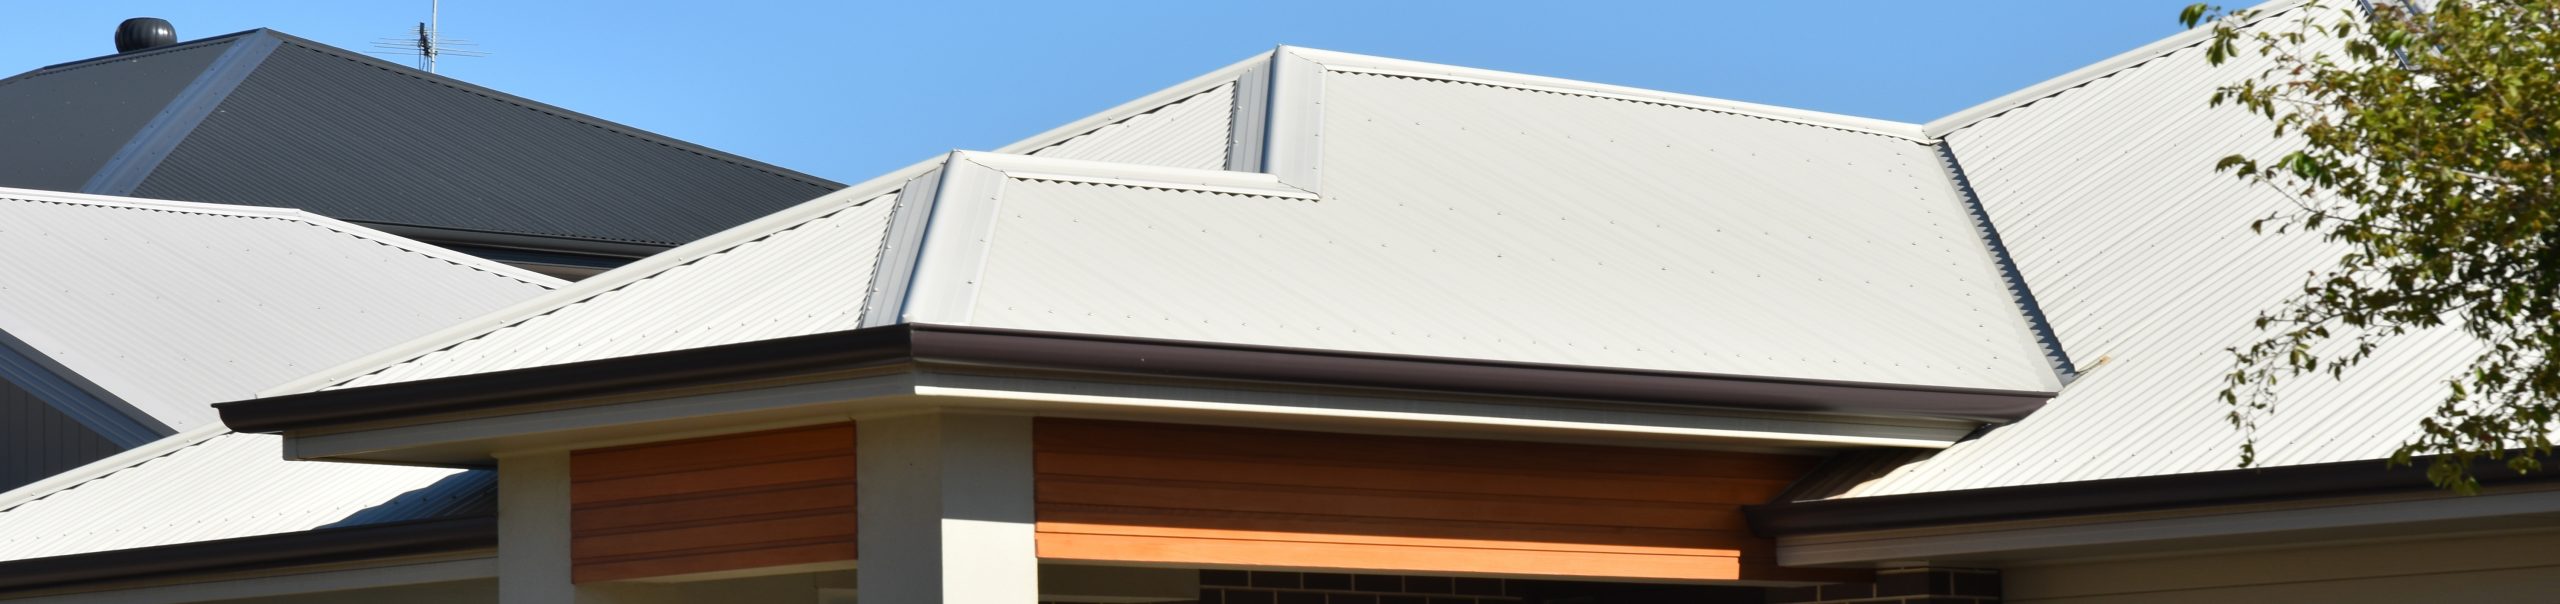 Steel Roofing & Re-Roofing Adelaide